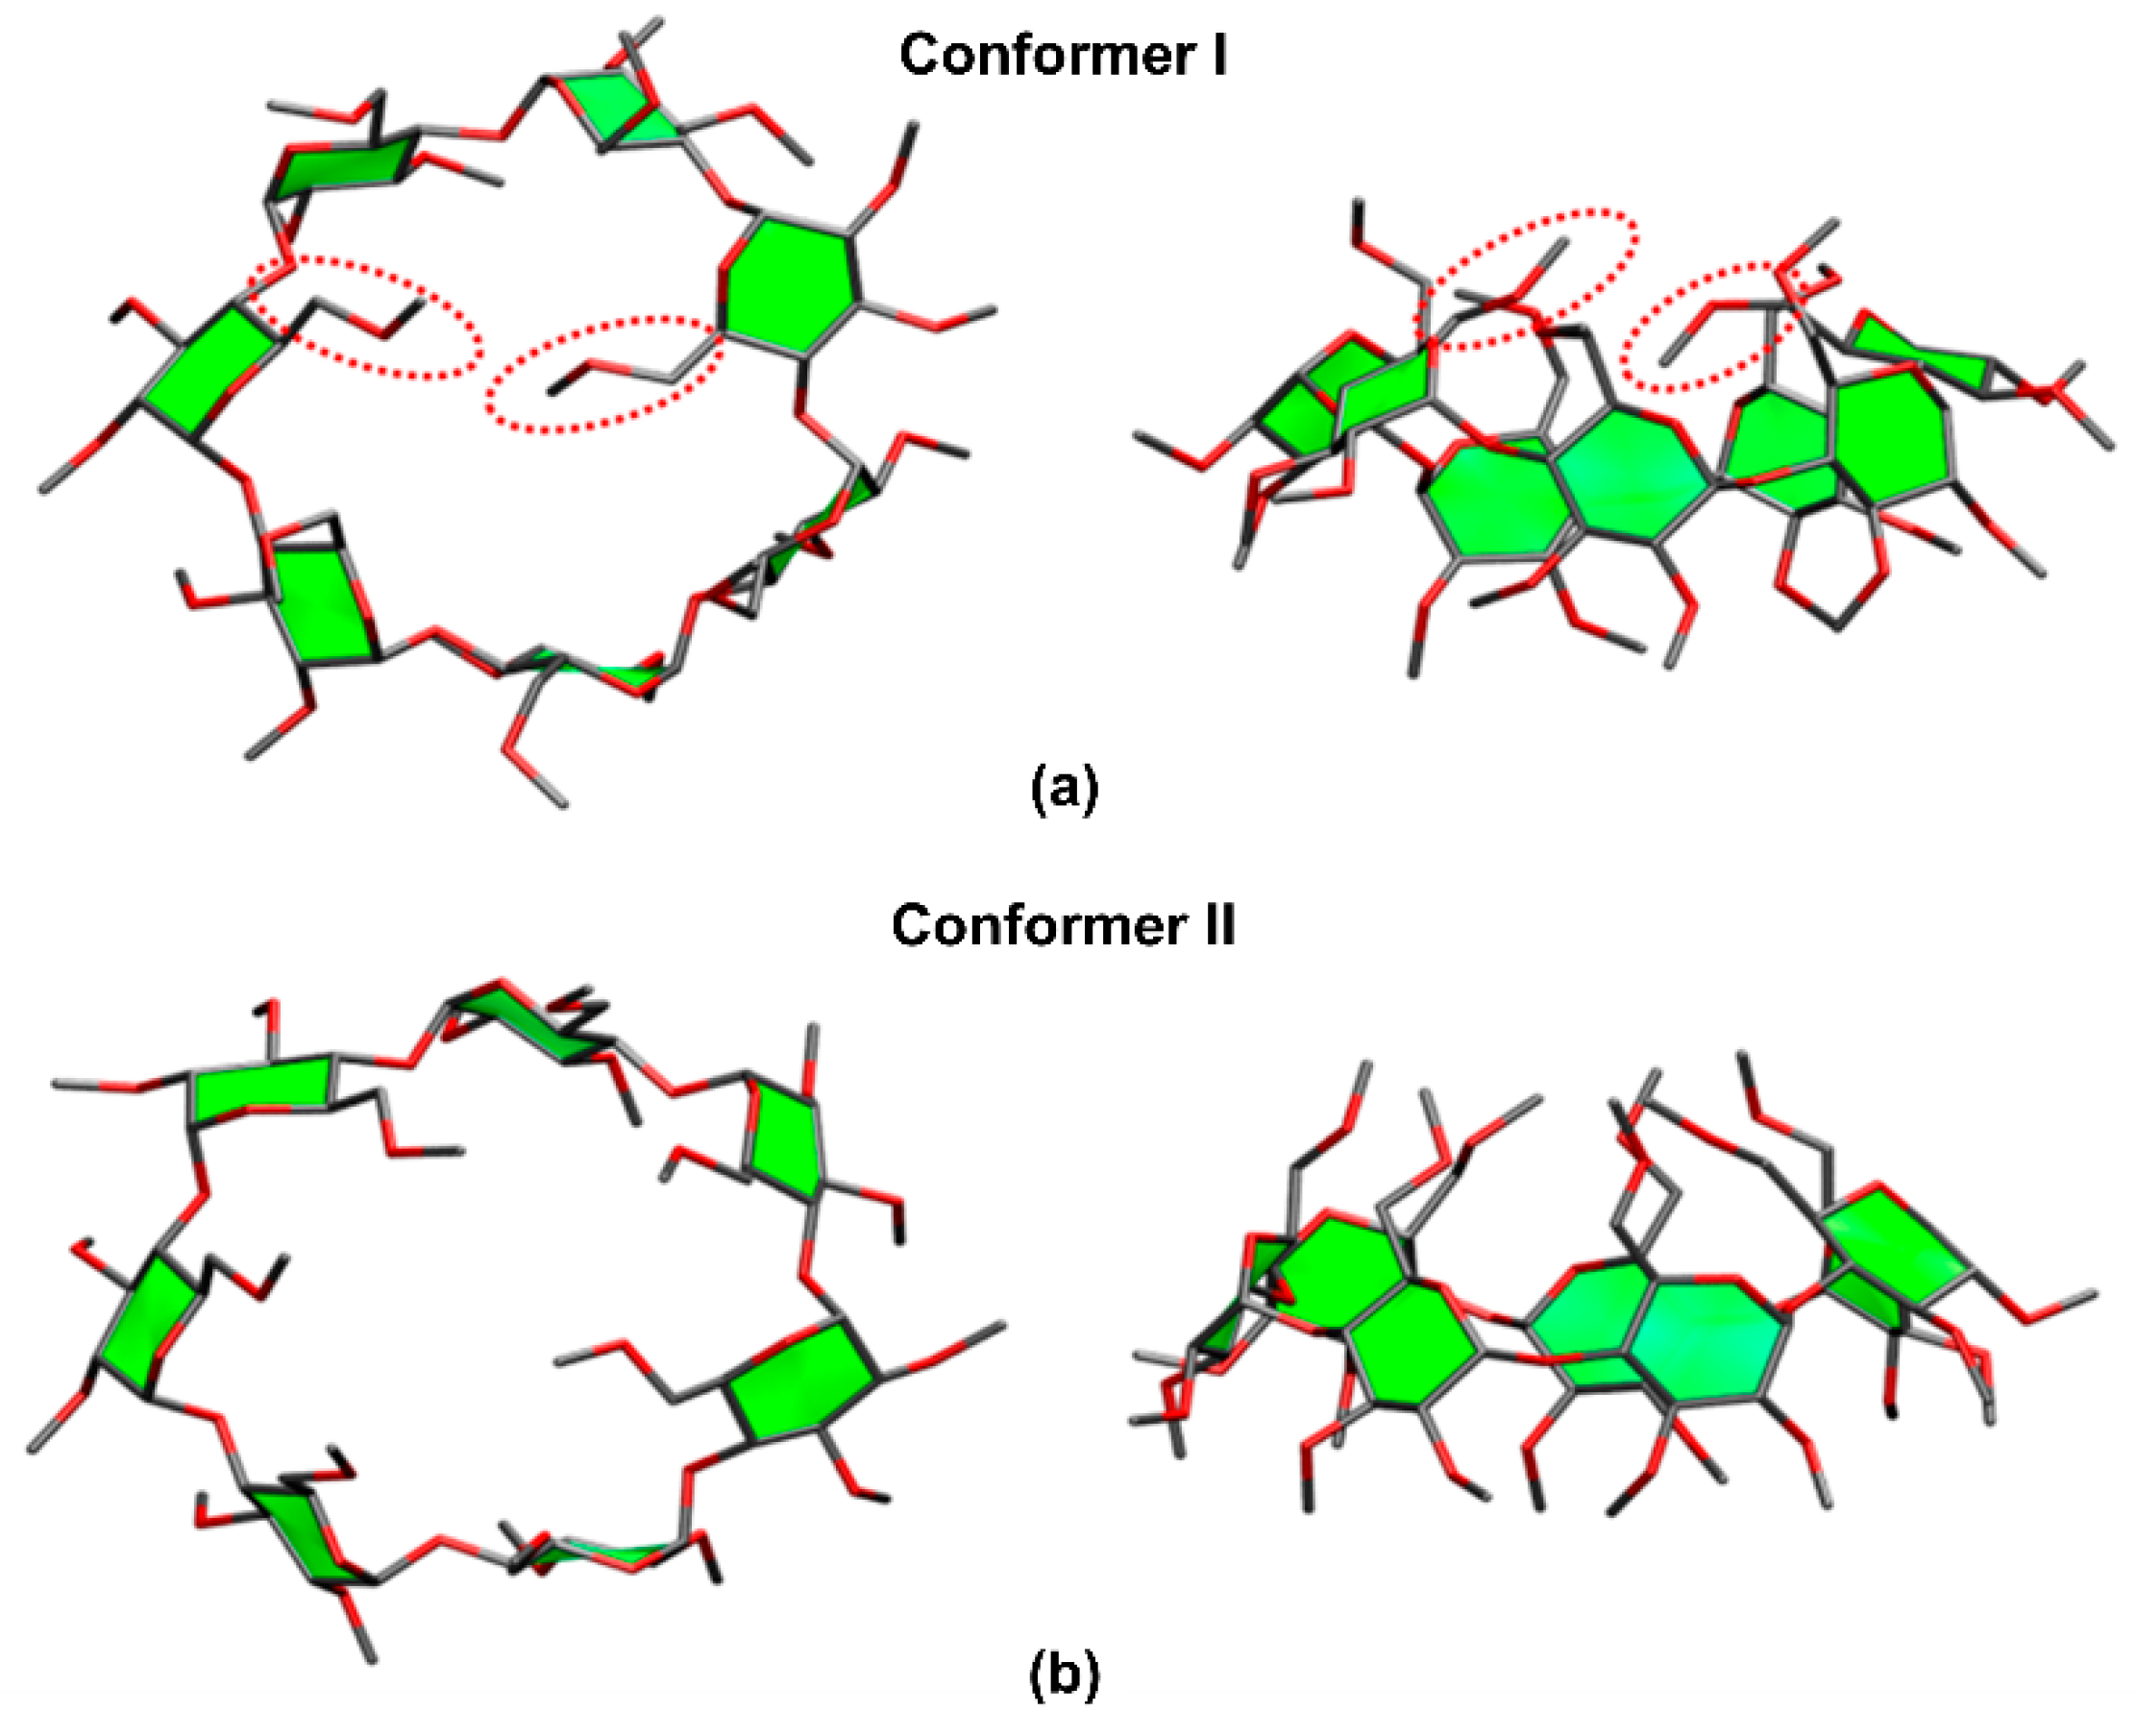 Molecules Free Full Text Noncovalent Complexes Of Cyclodextrin With Small Organic Molecules Applications And Insights Into Host Guest Interactions In The Gas Phase And Condensed Phase Html